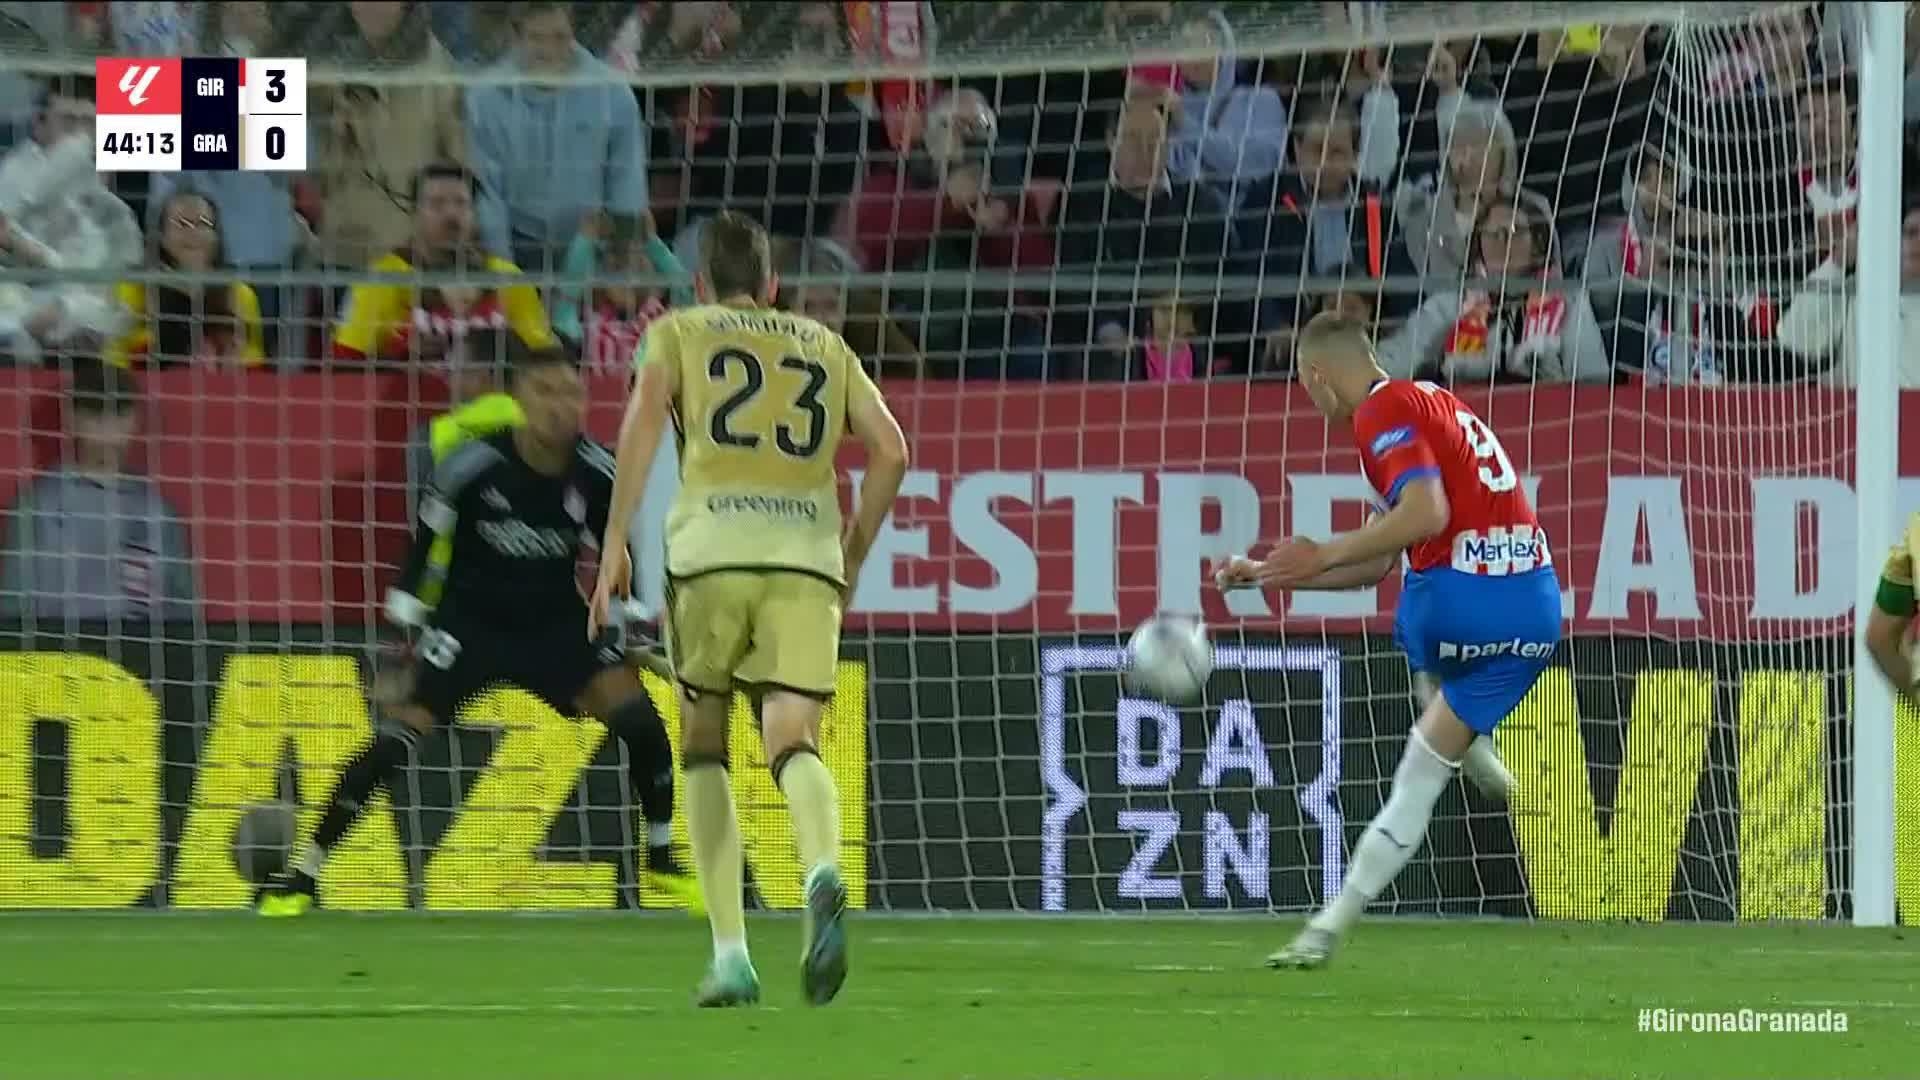 Artem Dovbyk converts from the spot for Girona to go up 3-0